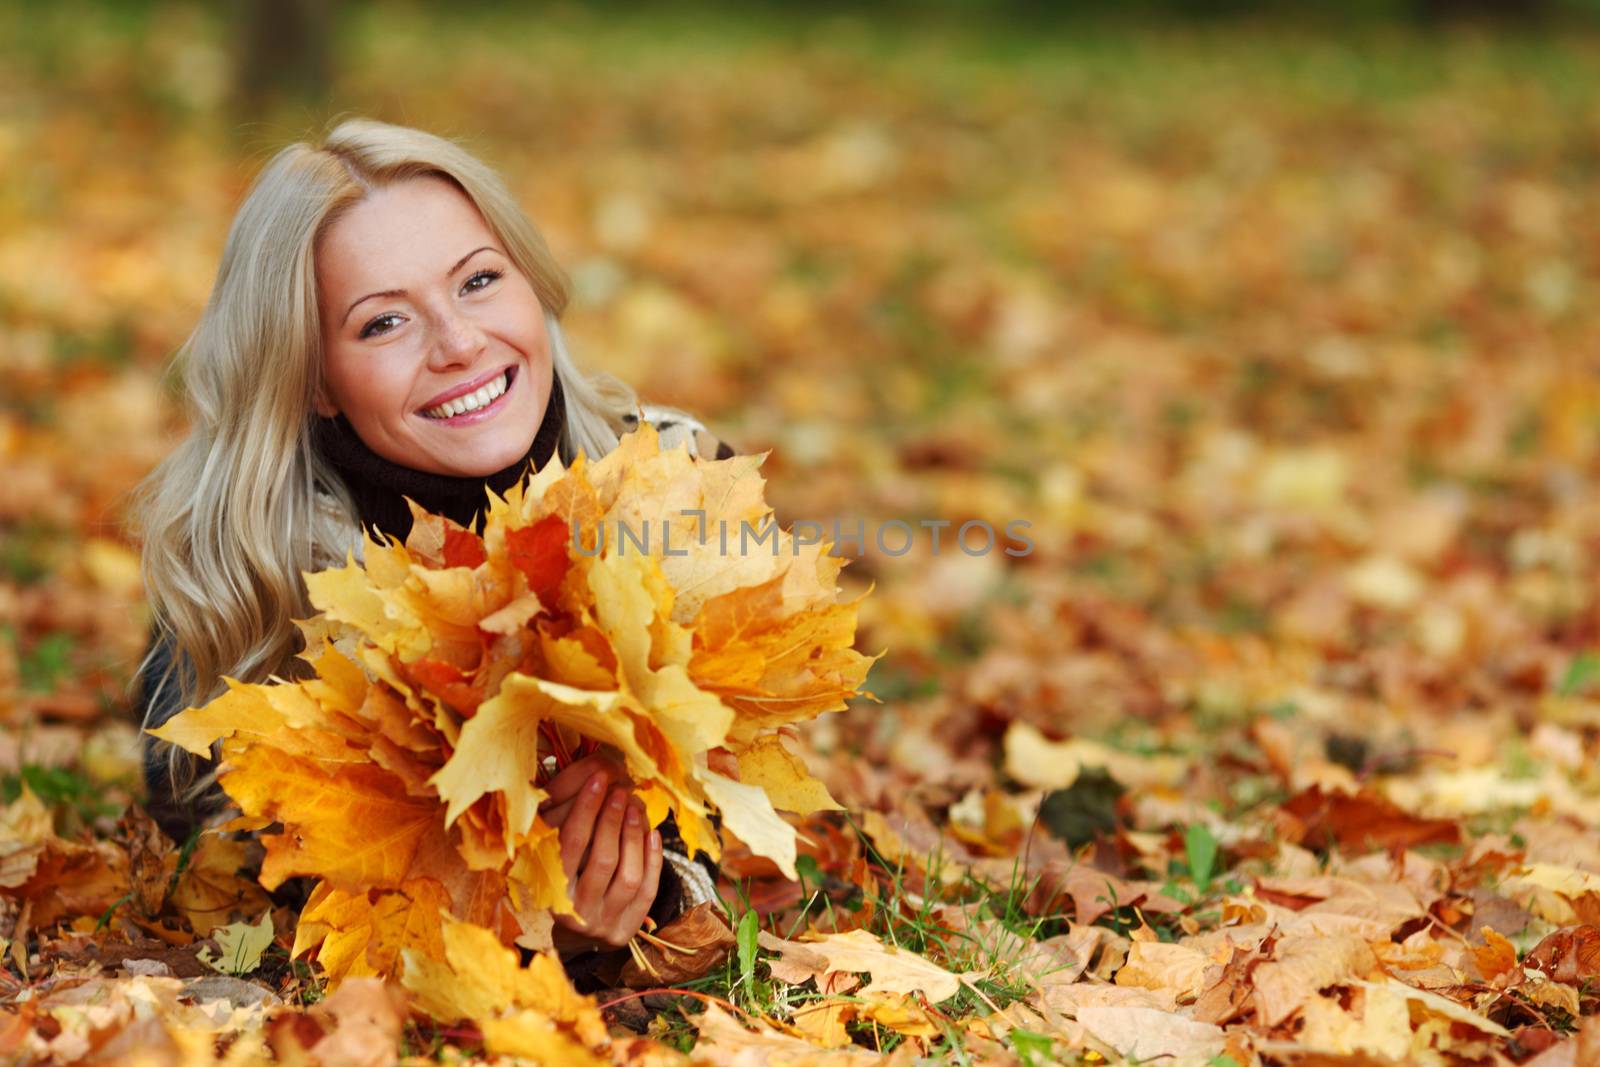 smiling woman portrait in autumn leaf holding bunch of leaves close up